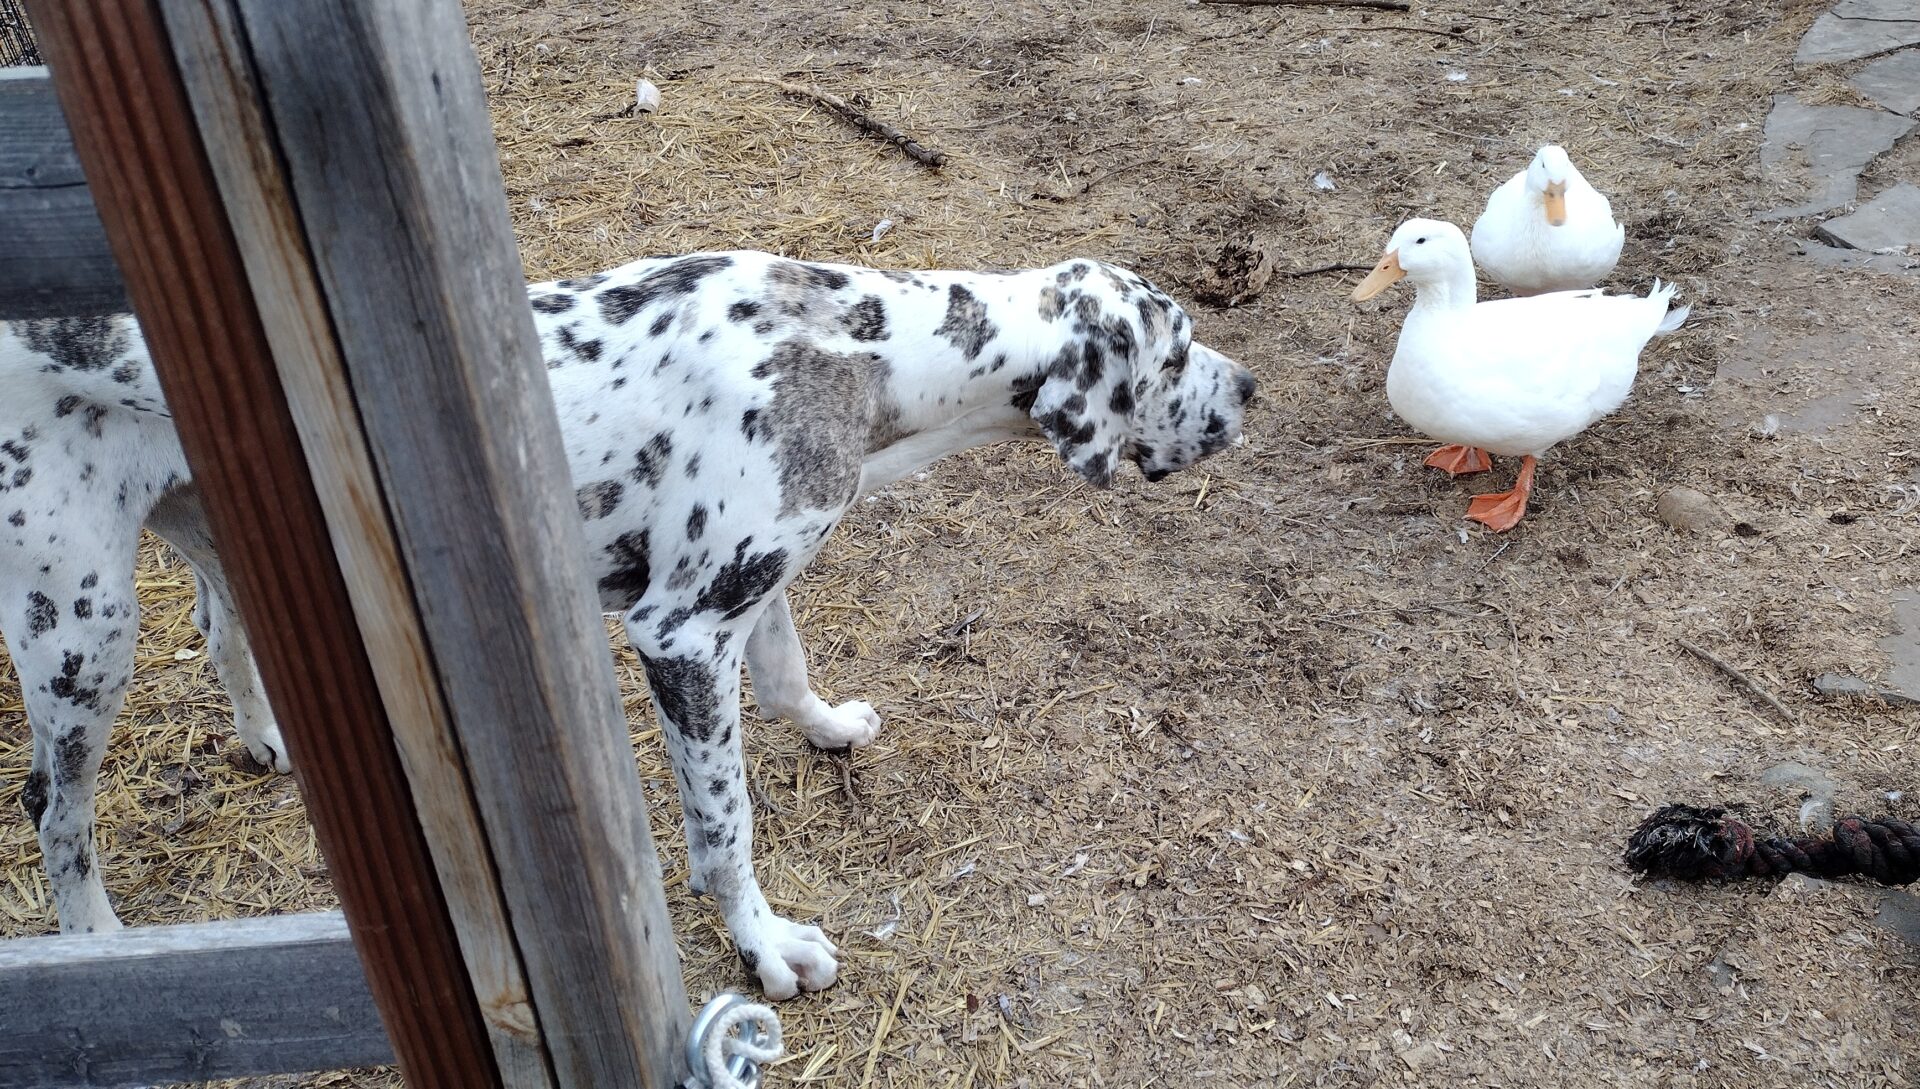 Trixie the Great Dane and the ducks